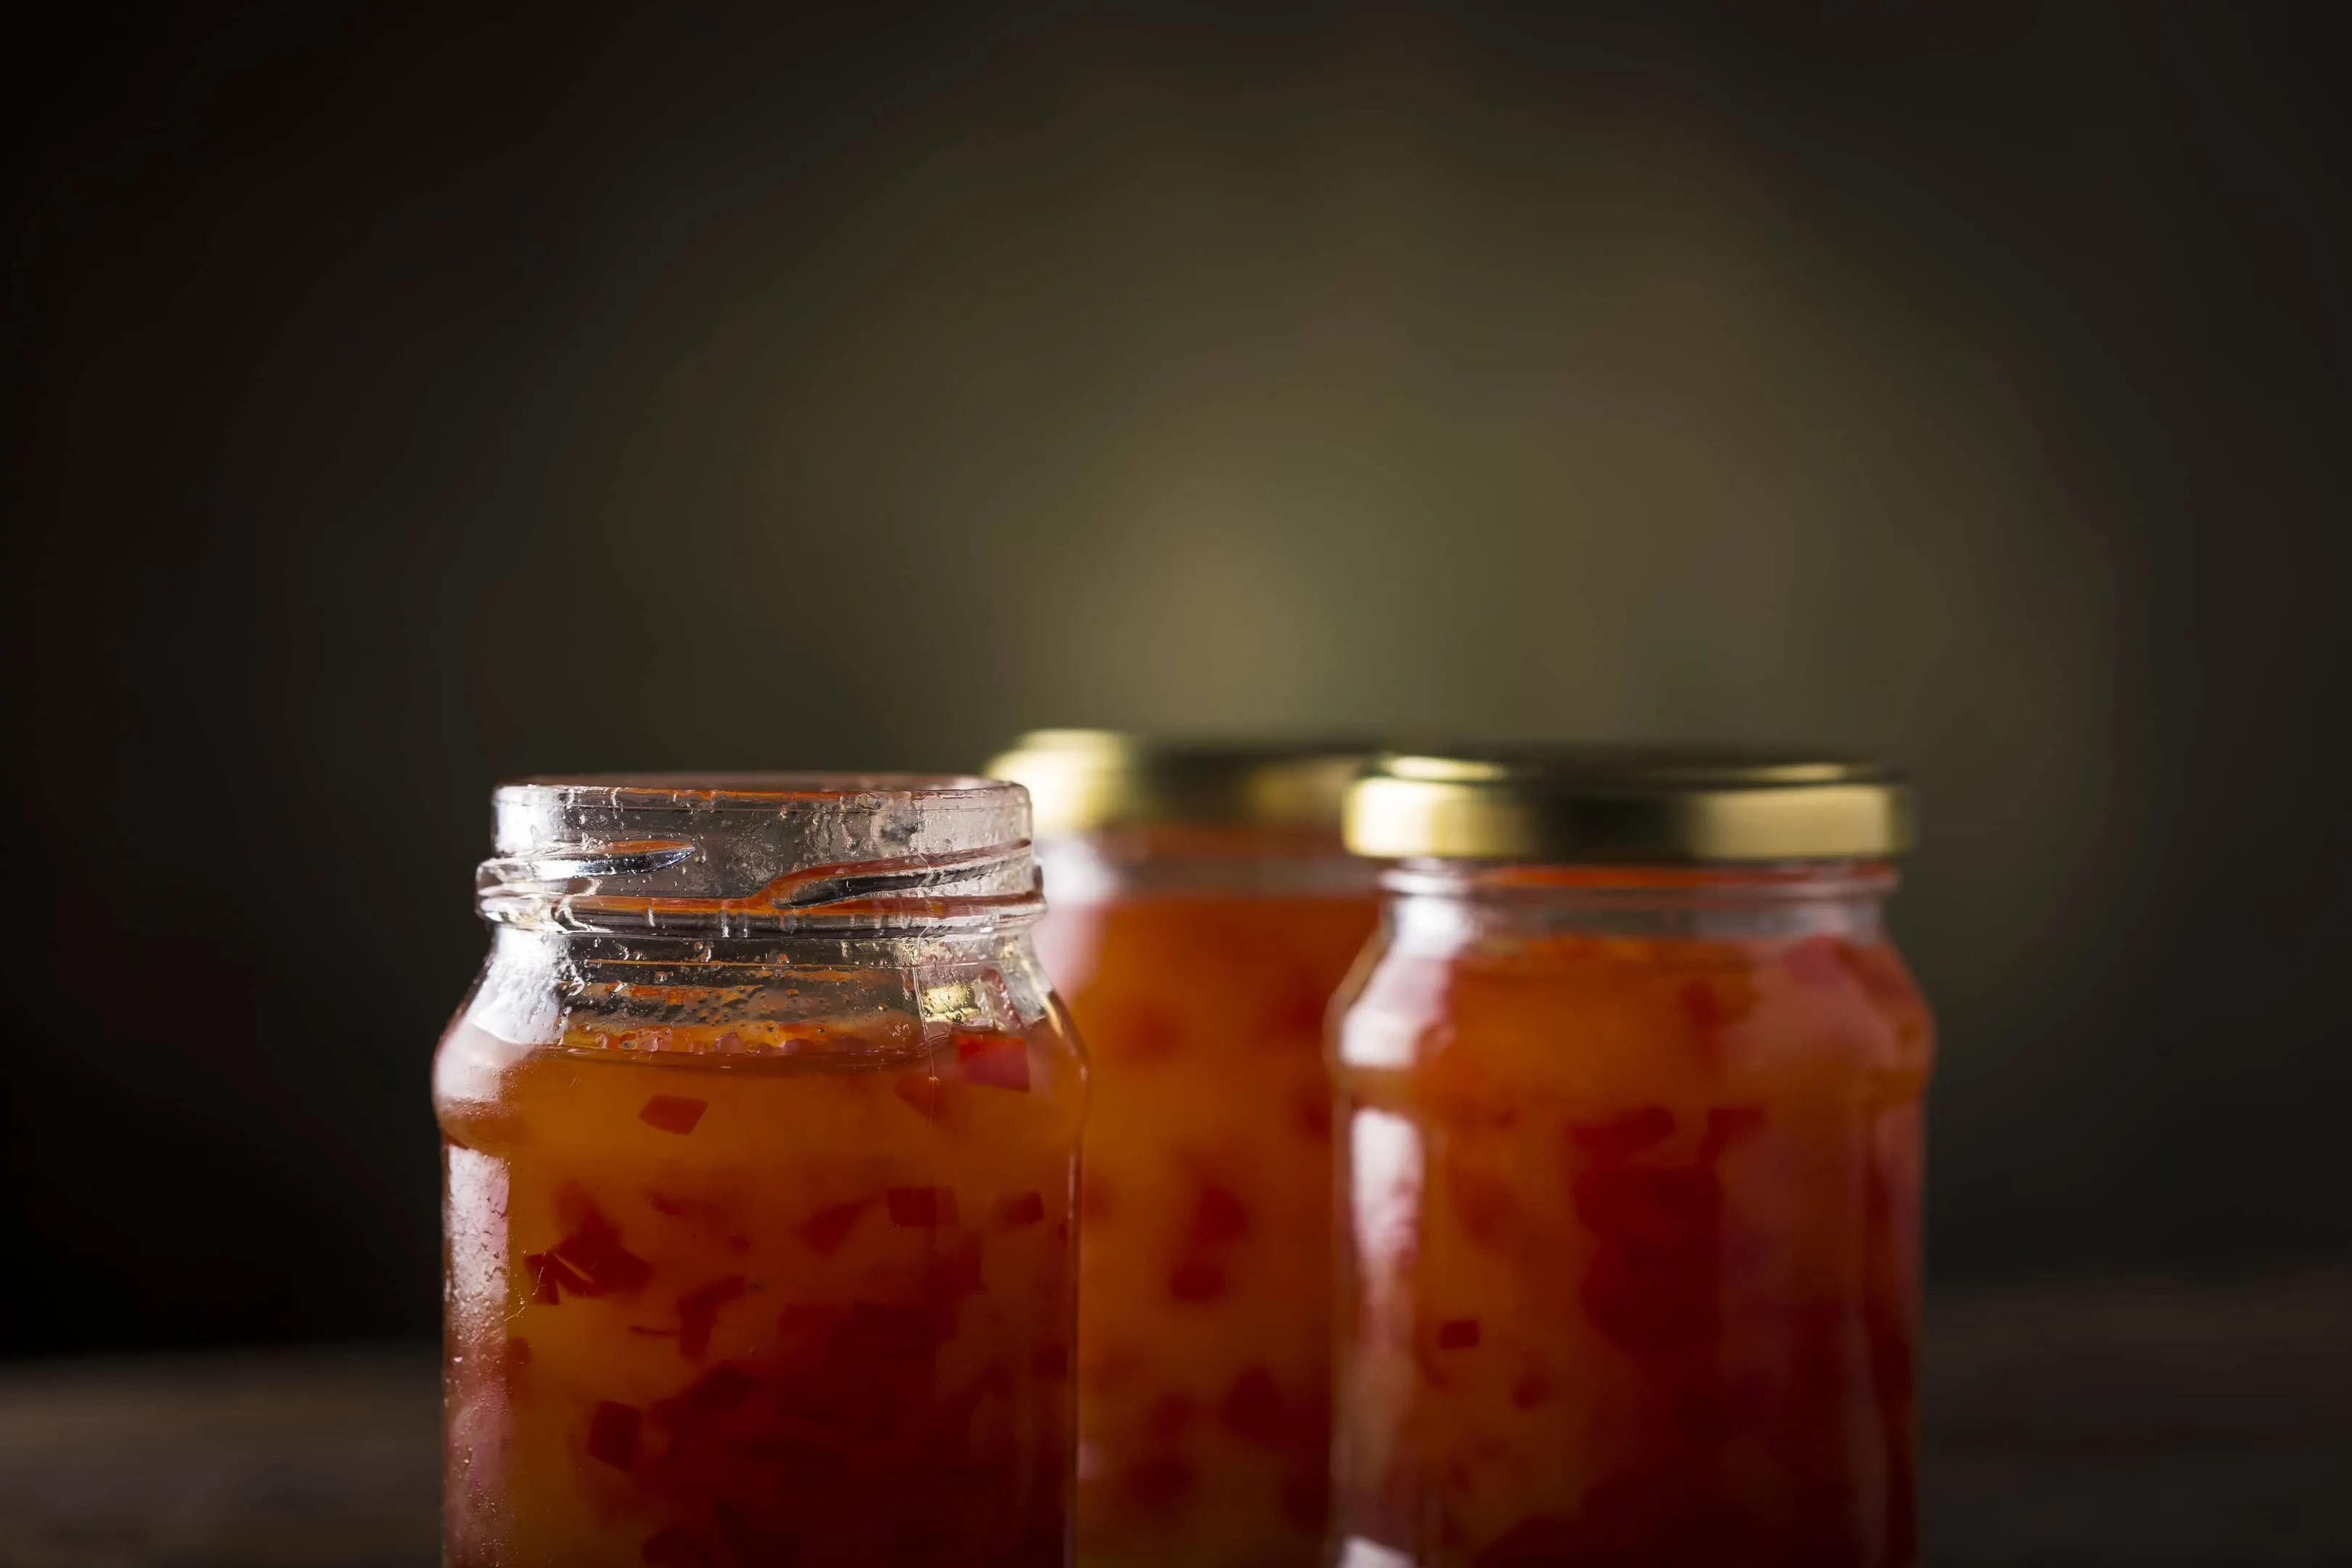 Jars of hot jalapeno jelly from Pioneer Woman